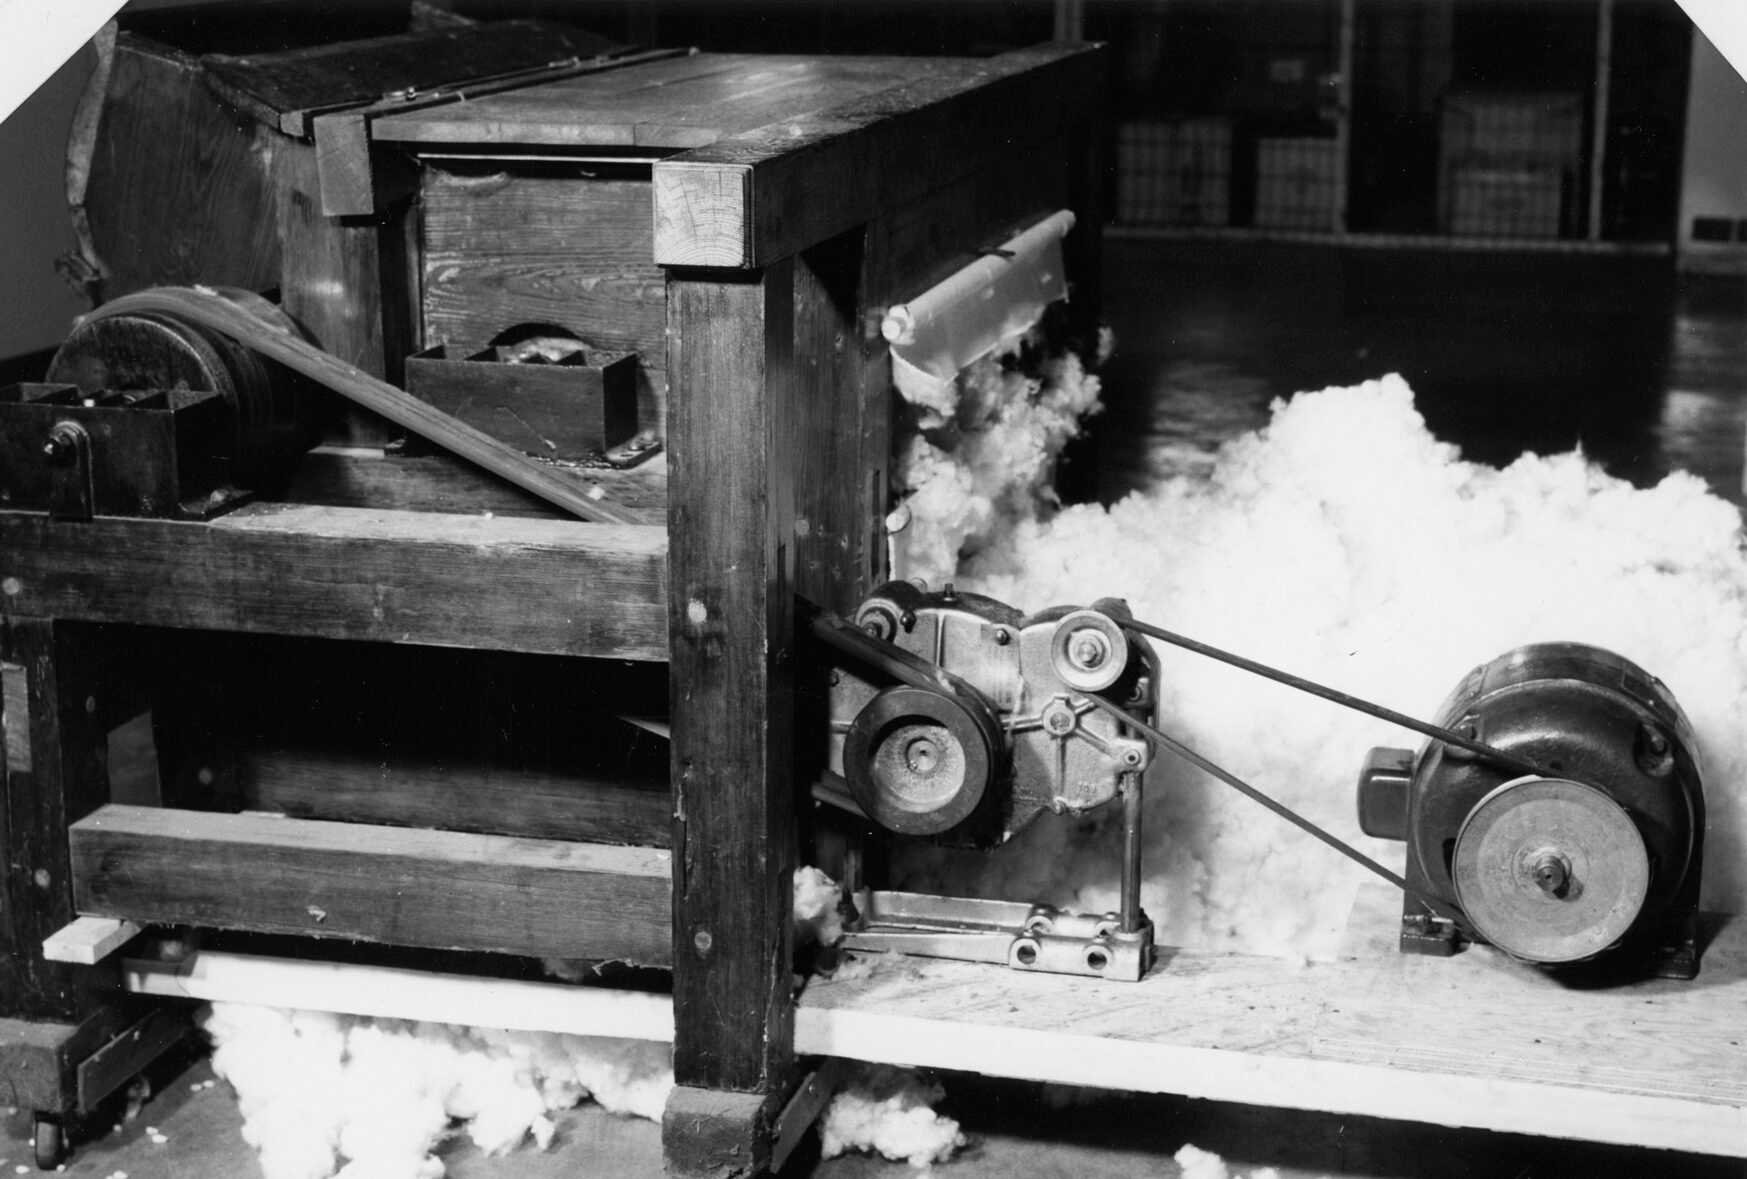 Photograph of the Greenwood Cotton Gin